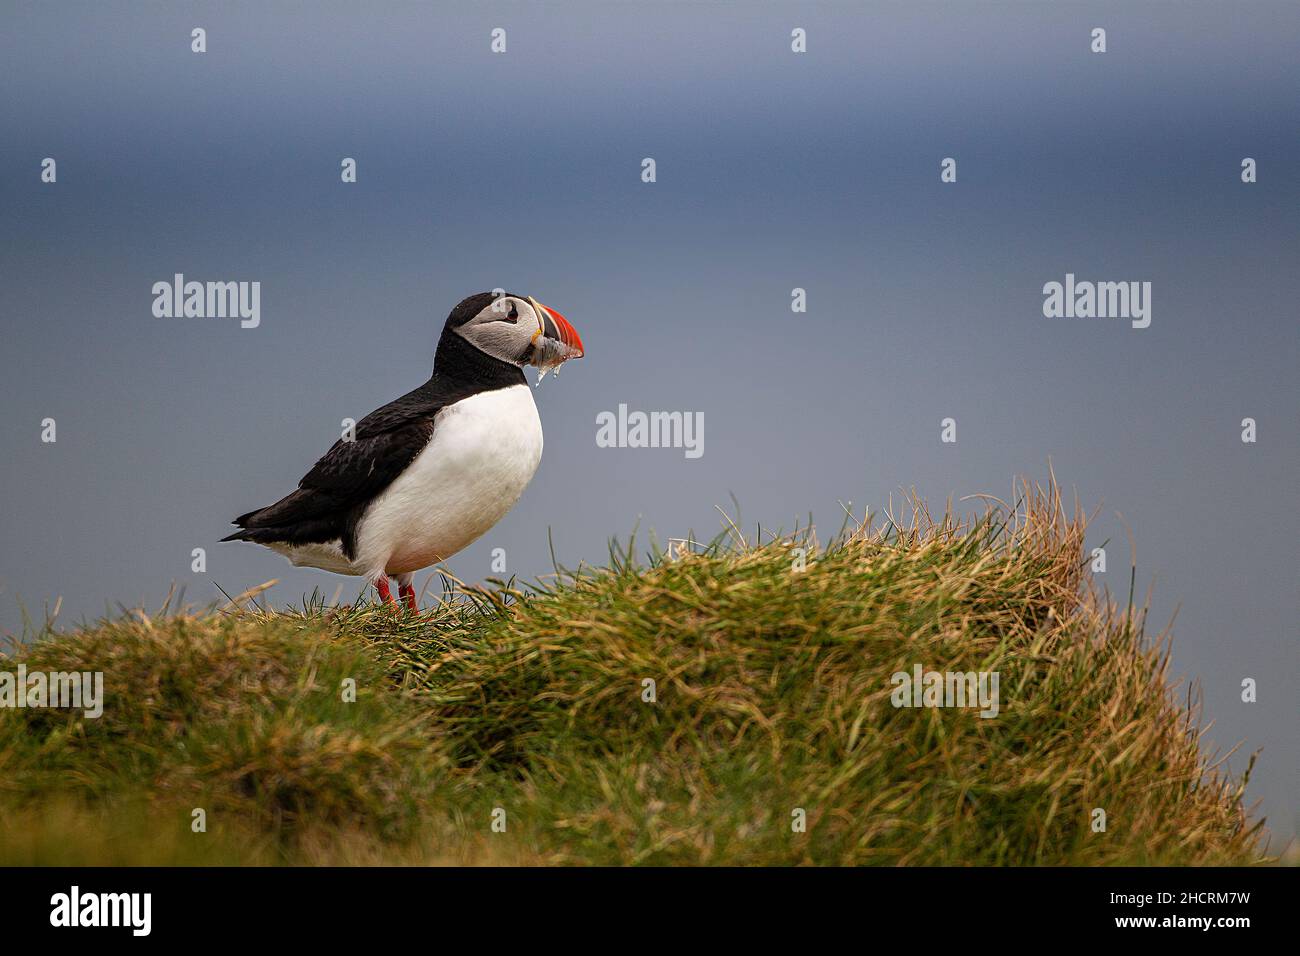 An eye level view of an Atlantic Puffin Fratercula arctica in profile and summer plumage on a grassy tuft in Iceland Stock Photo